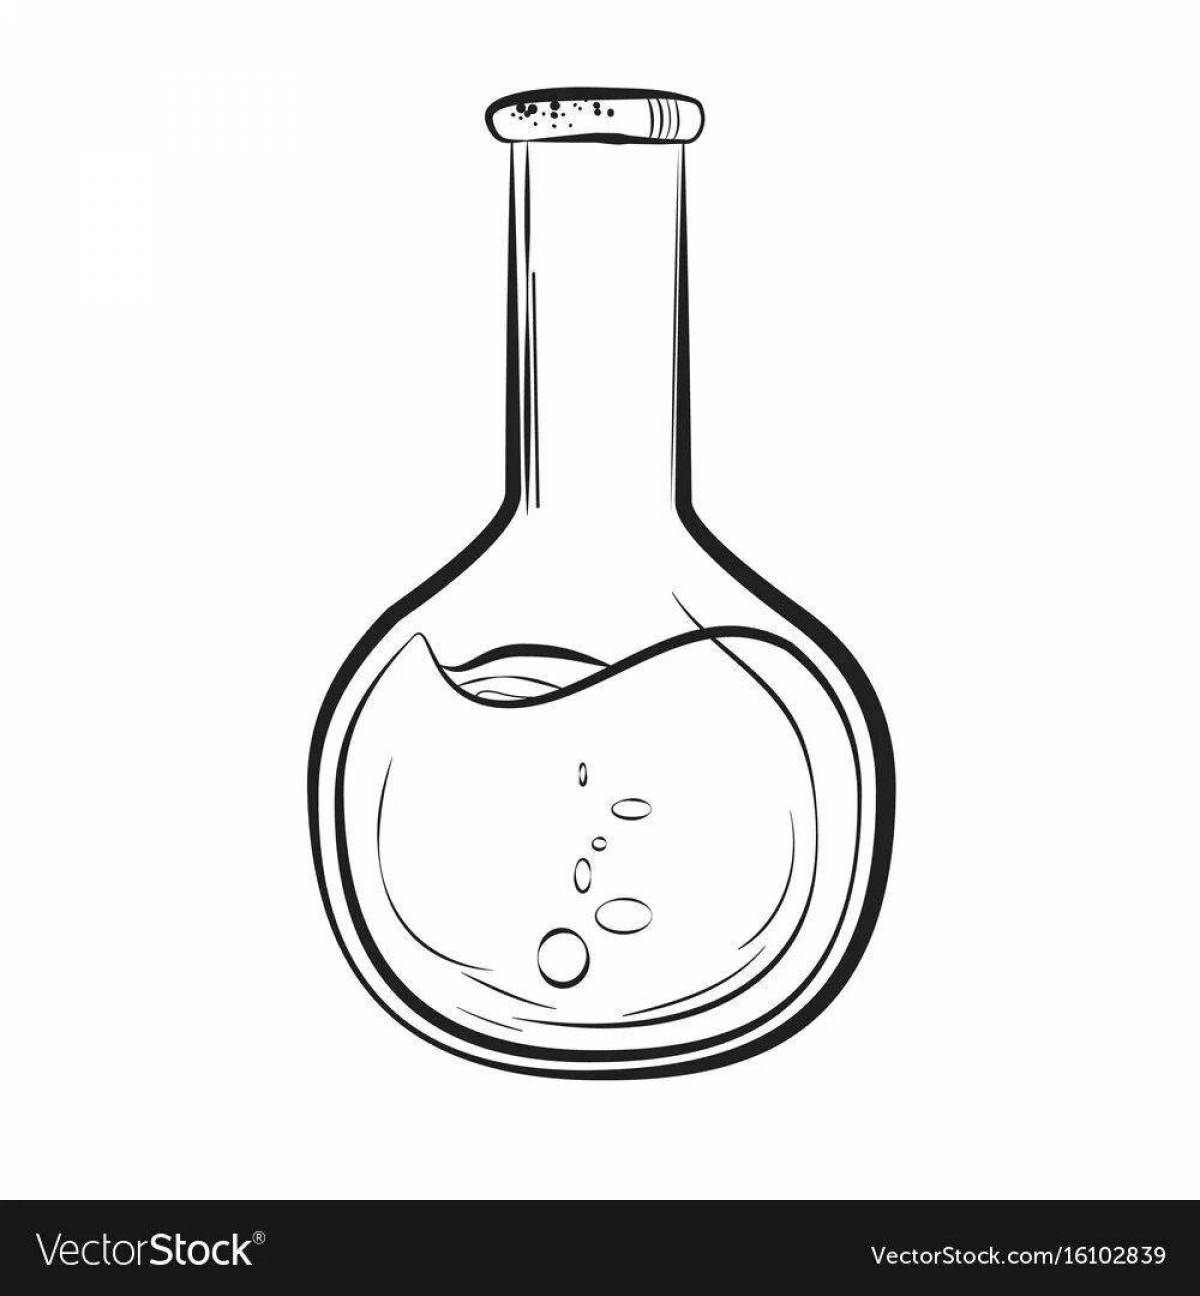 Playful flask coloring page